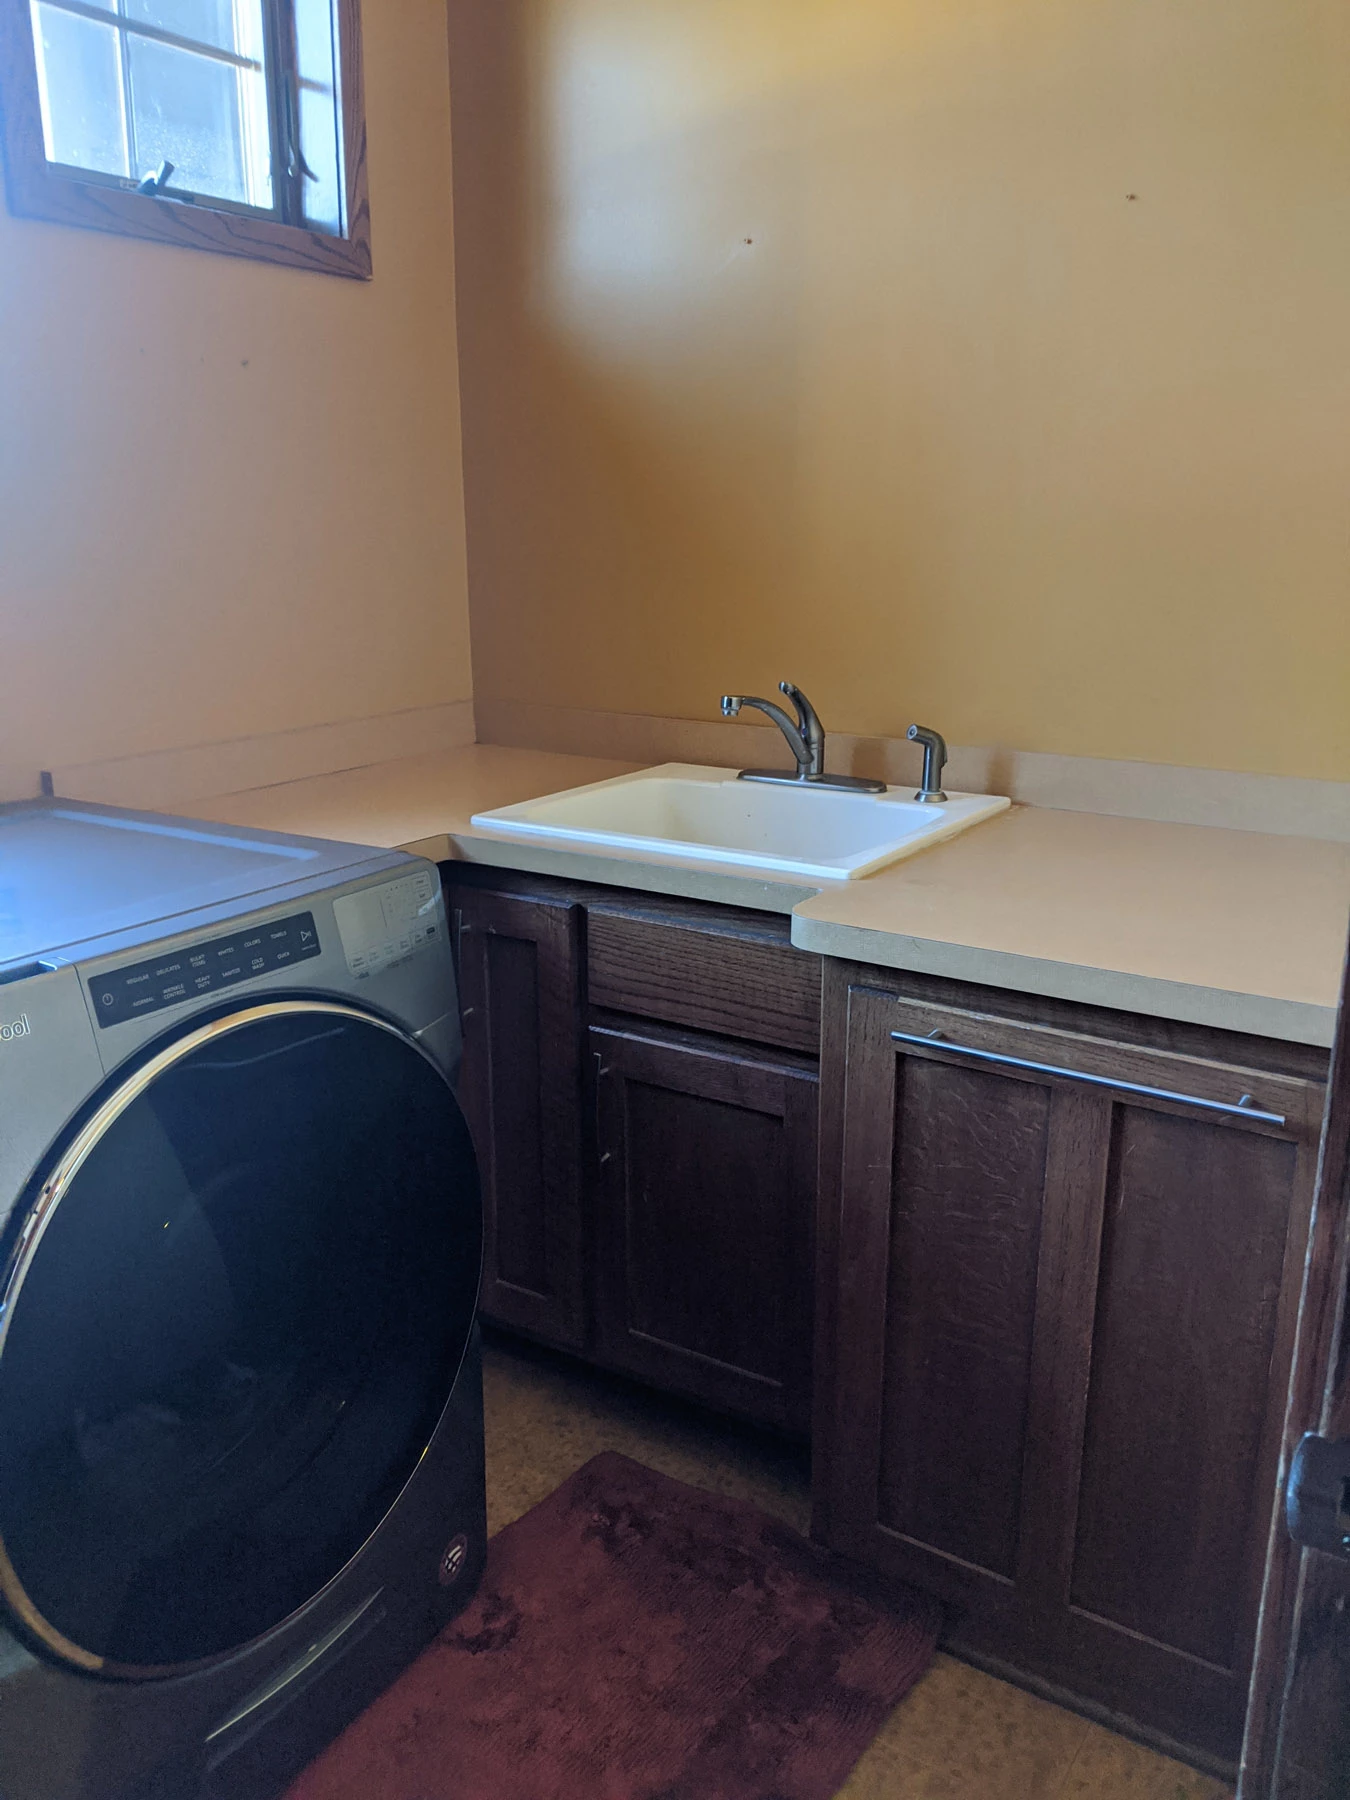 Laundry Room Before Remodel